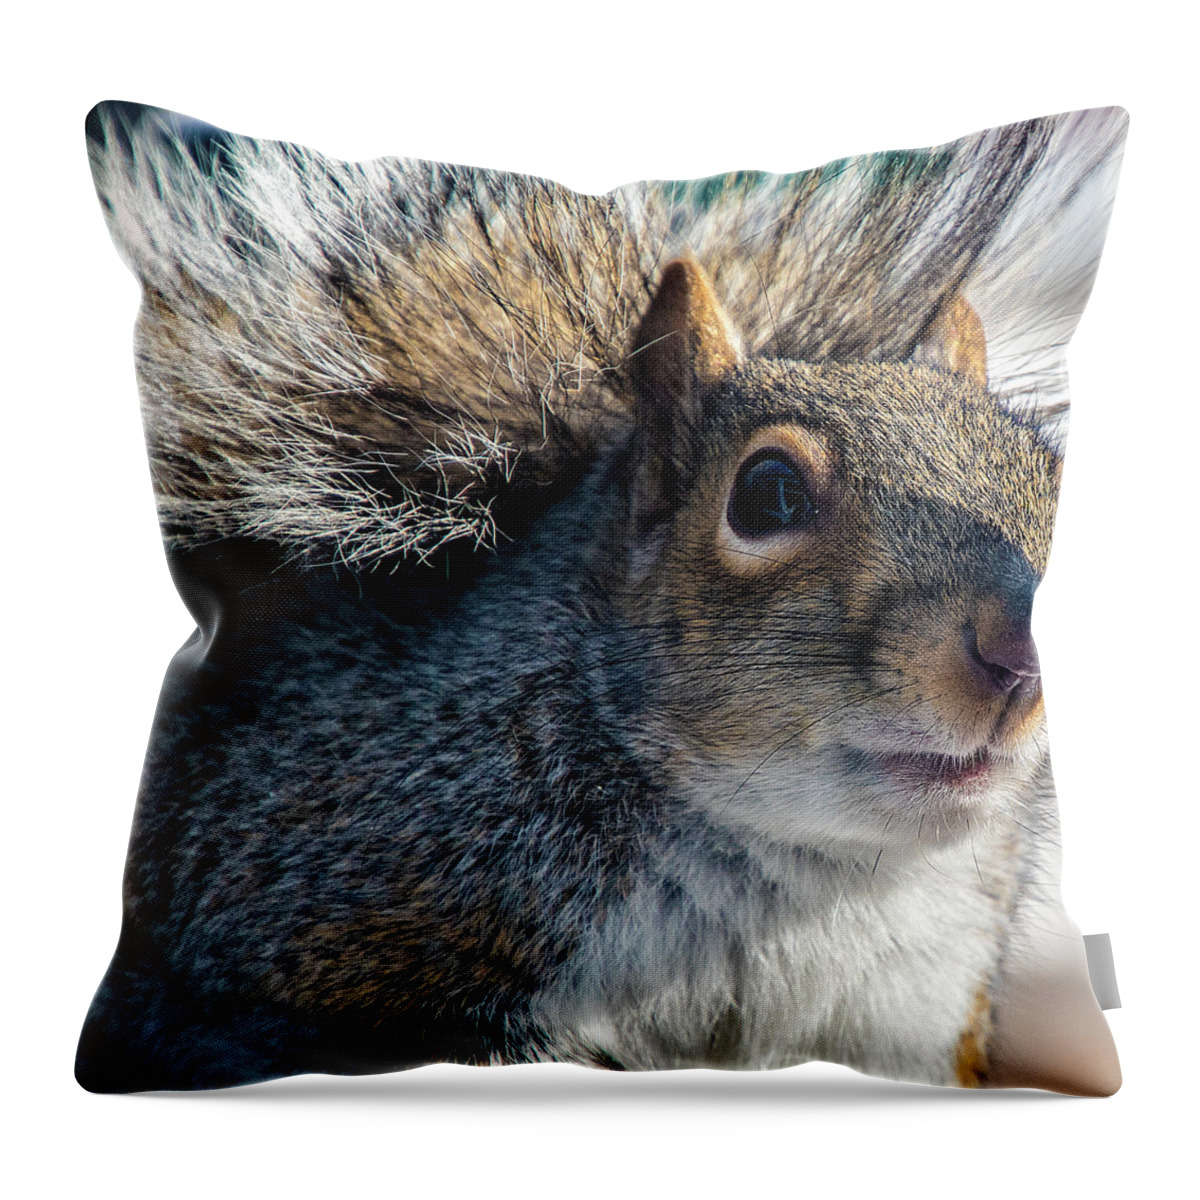 Squirrel Throw Pillow featuring the photograph Hello #2 by Cathy Kovarik